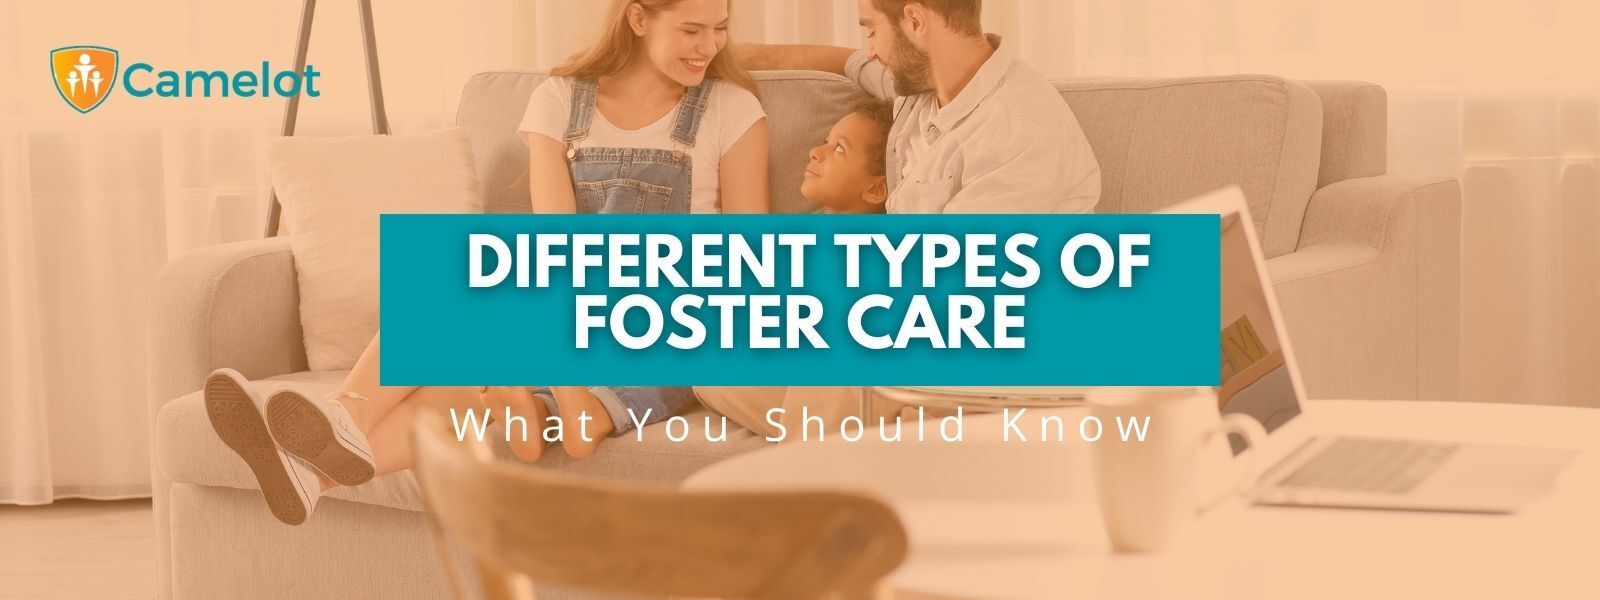 Different types of foster care